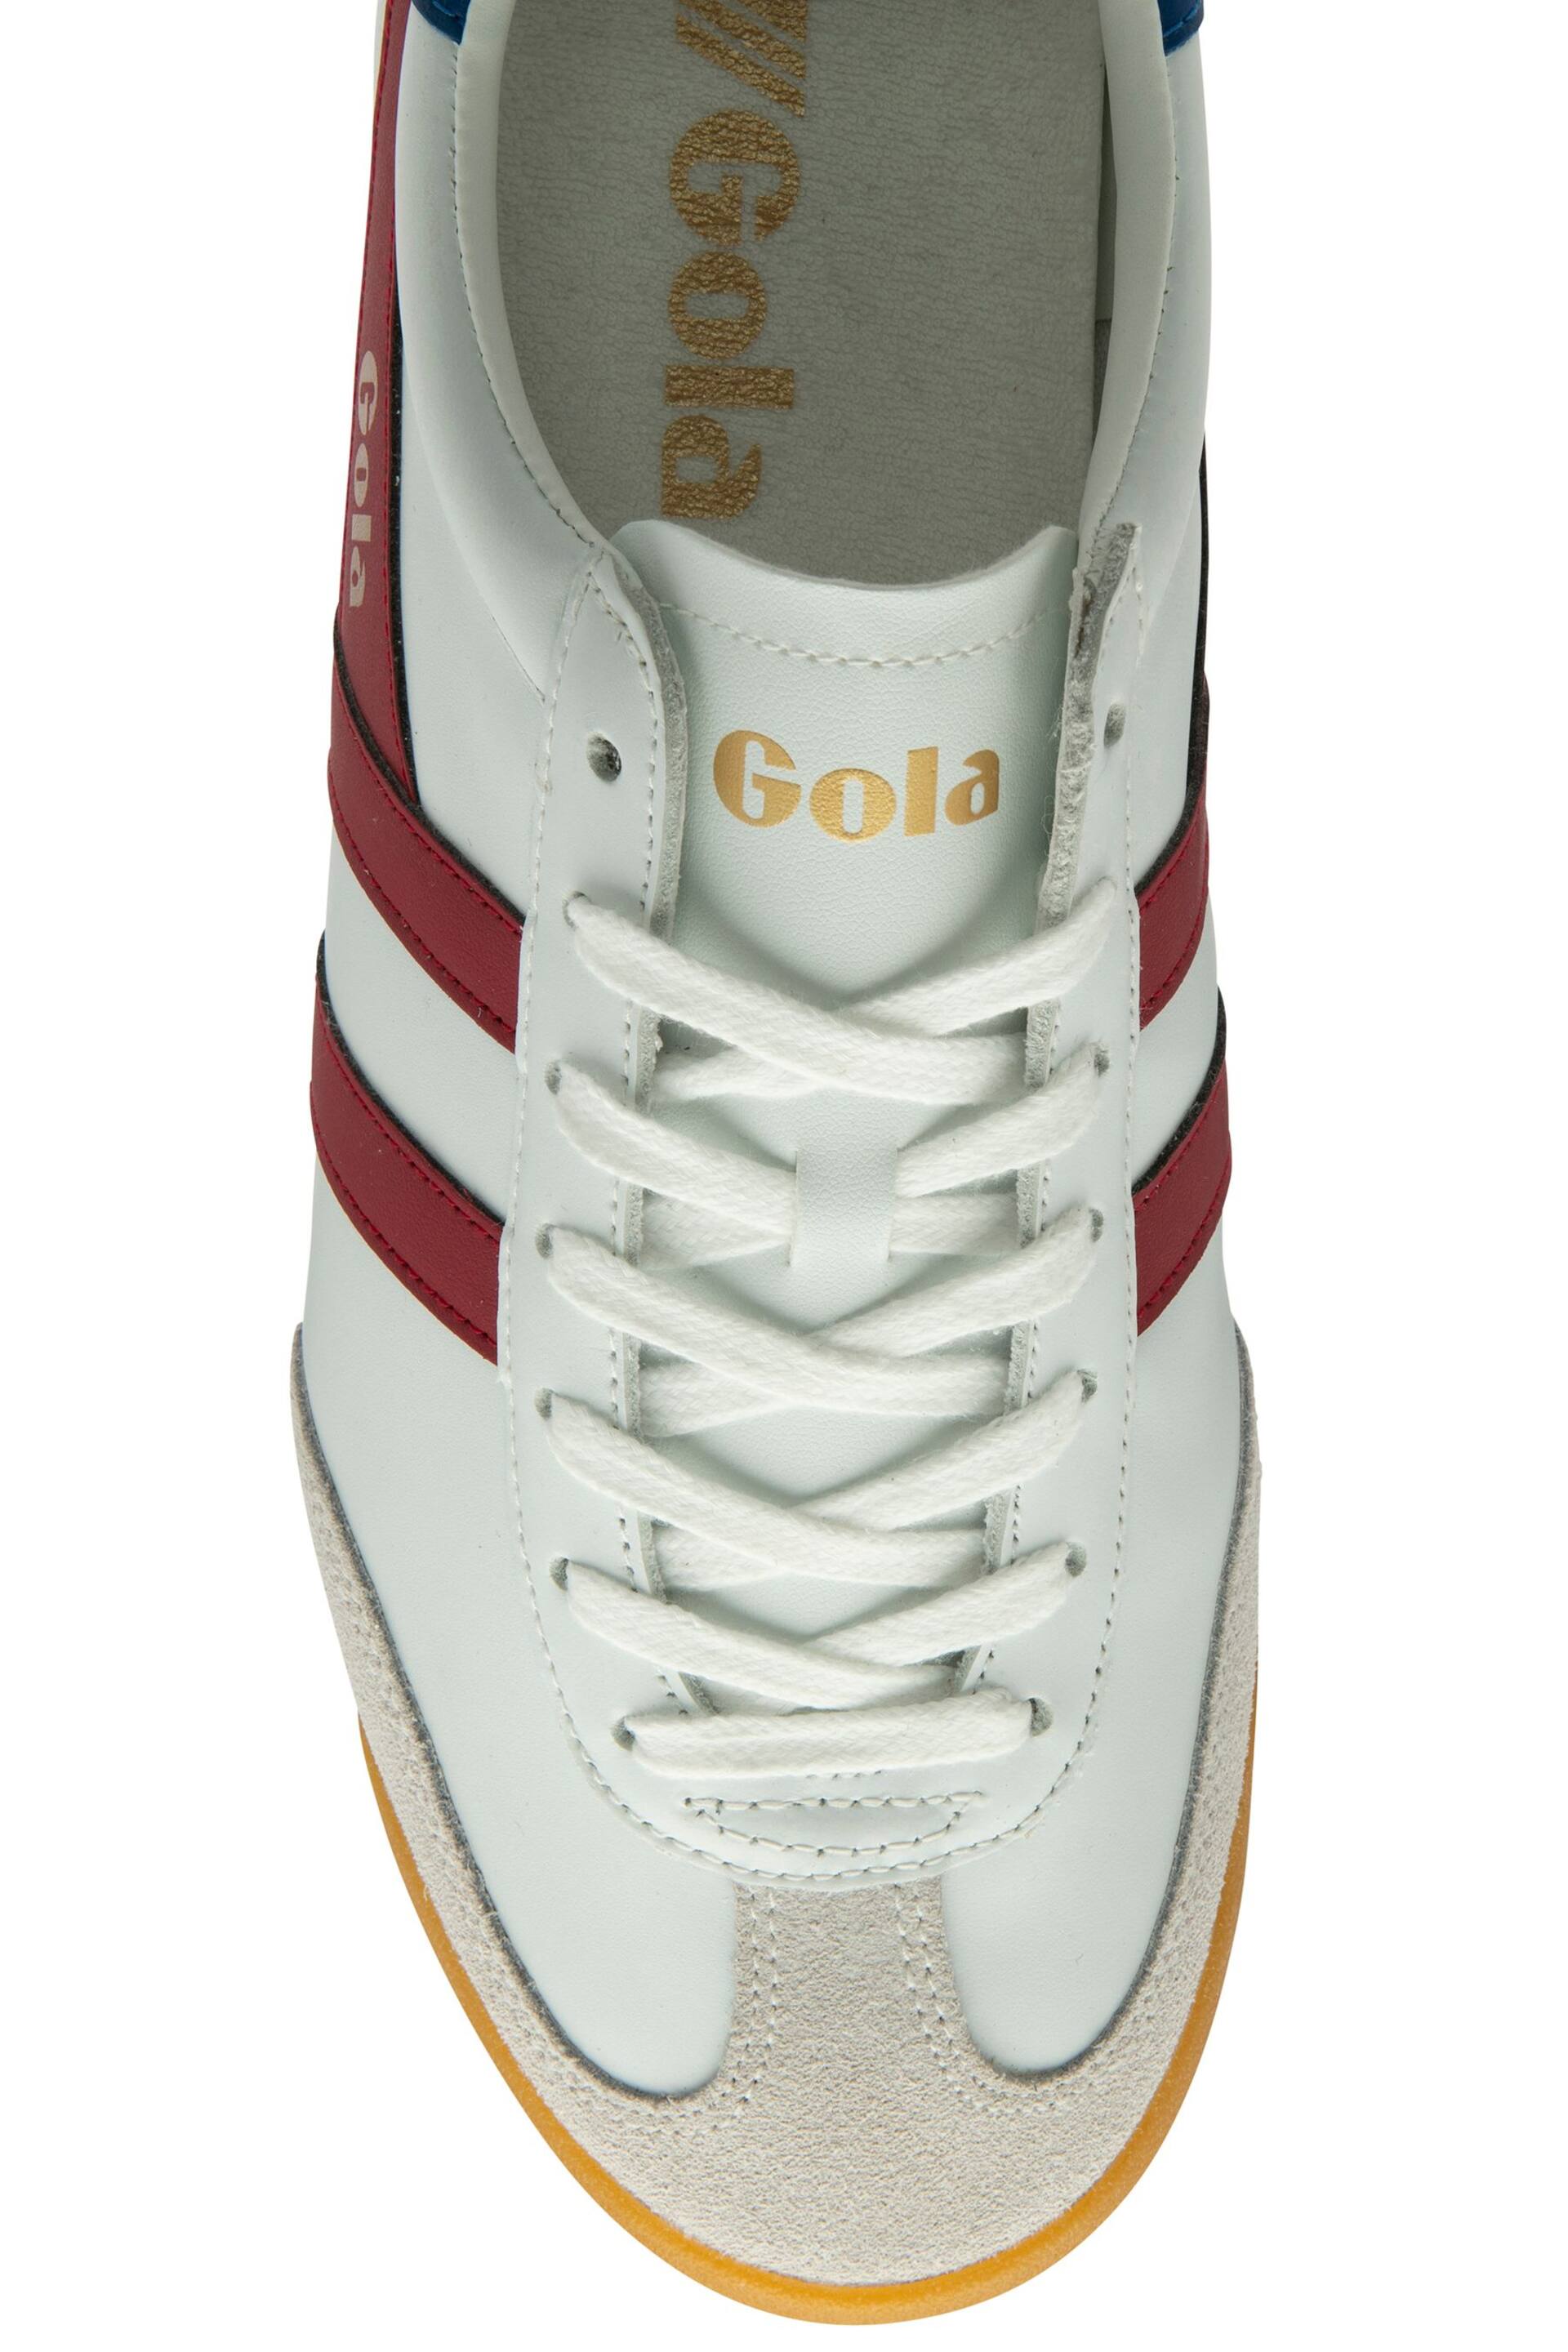 Gola White/Deep Red/Sapphire Mens Torpedo Leather Lace-Up Trainers - Image 4 of 4